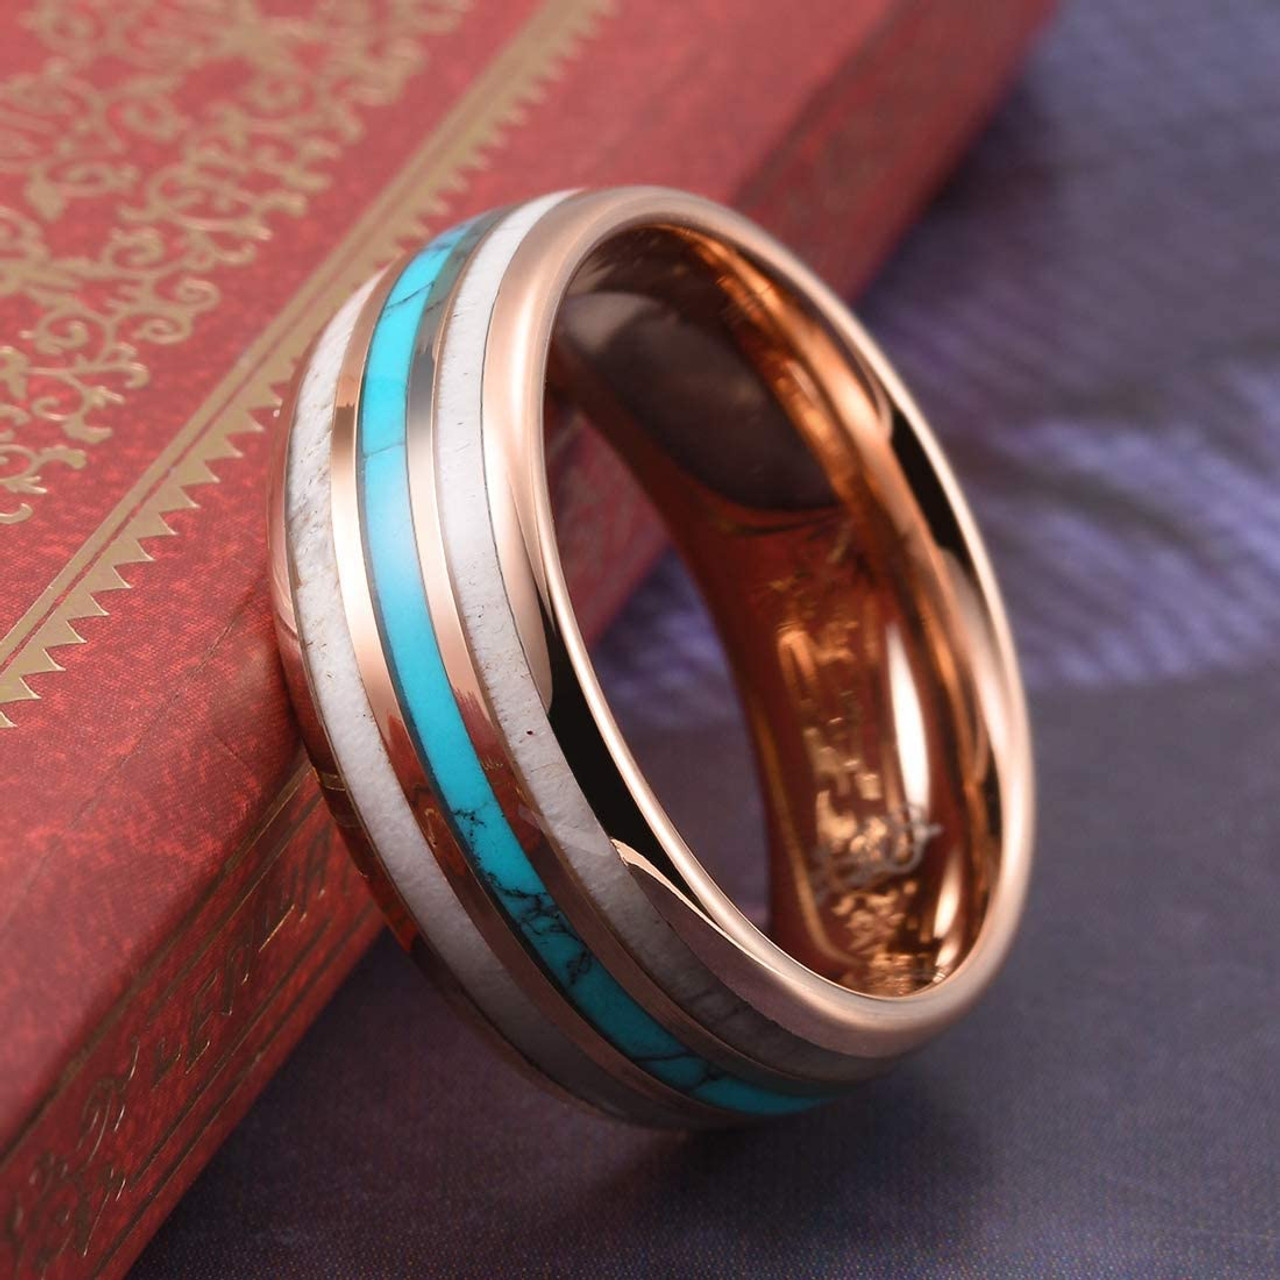 (8mm) Unisex or Men's Tungsten Carbide Wedding Ring Band - Rose Gold Band Blue Turquoise, Racing Stripes and White Antler Inlay Ring. 